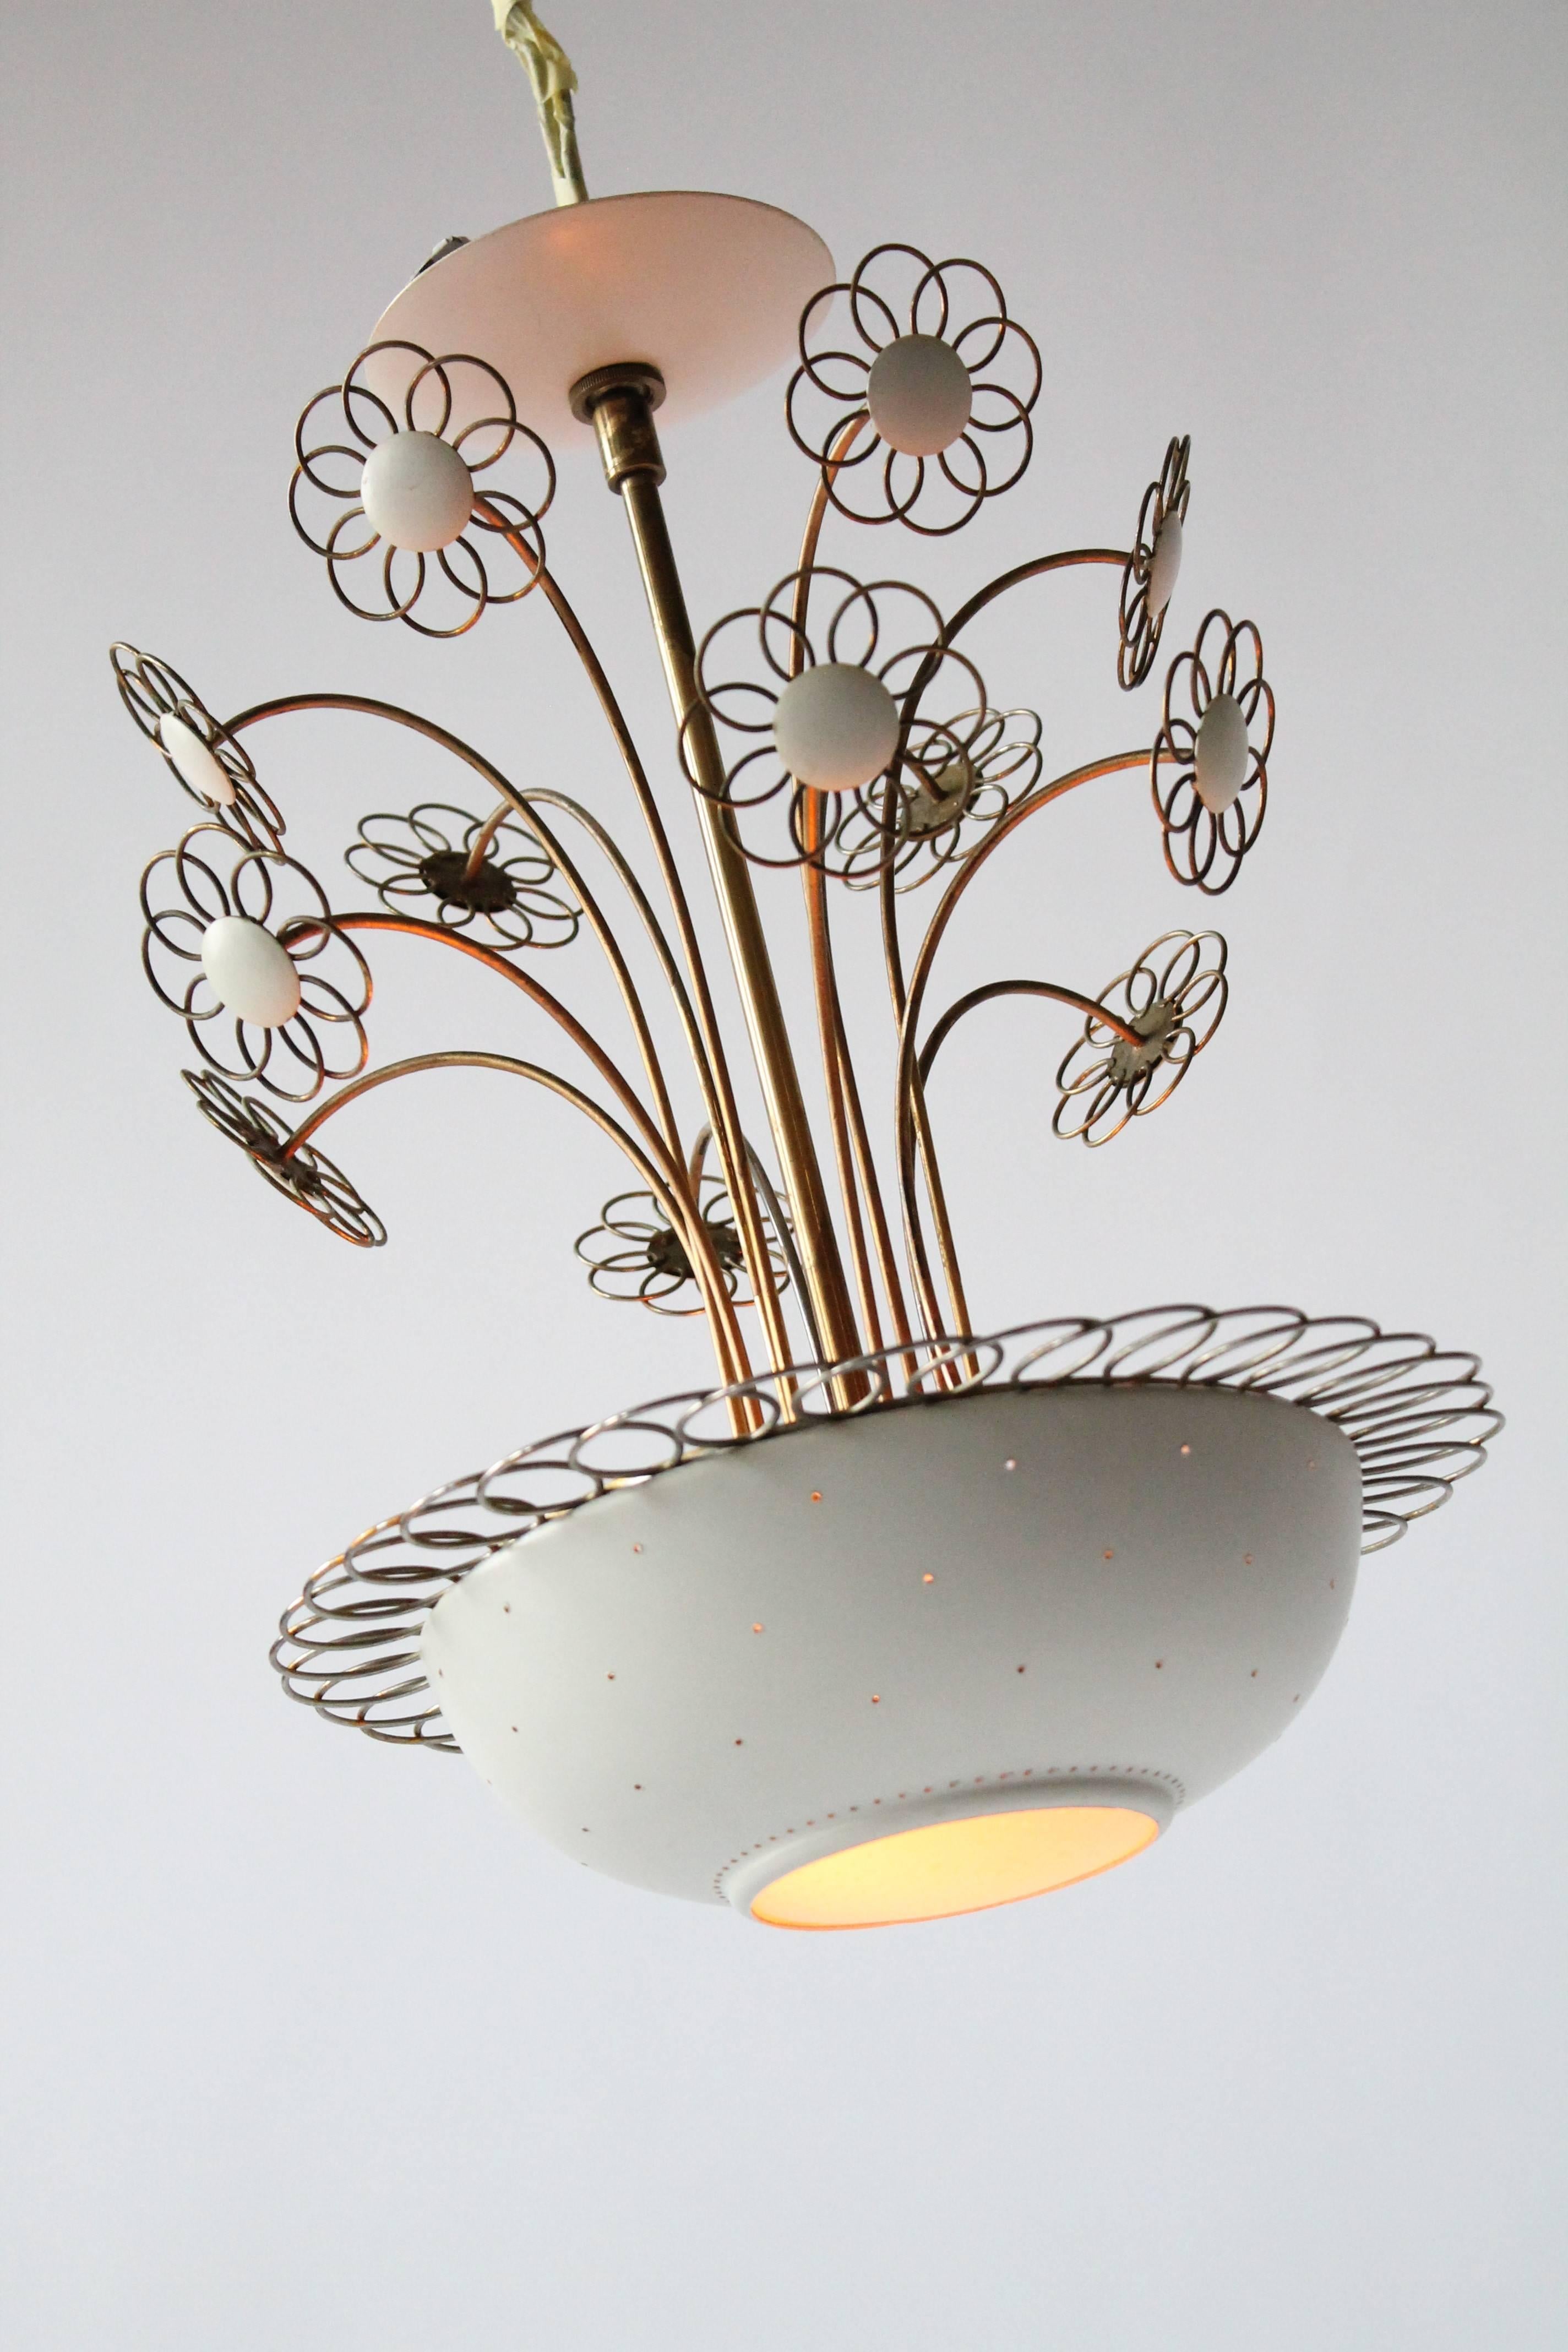 North American Lightolier Chandelier in the Style of Paavo Tynel, Mid-Century Modern 1950s, USA